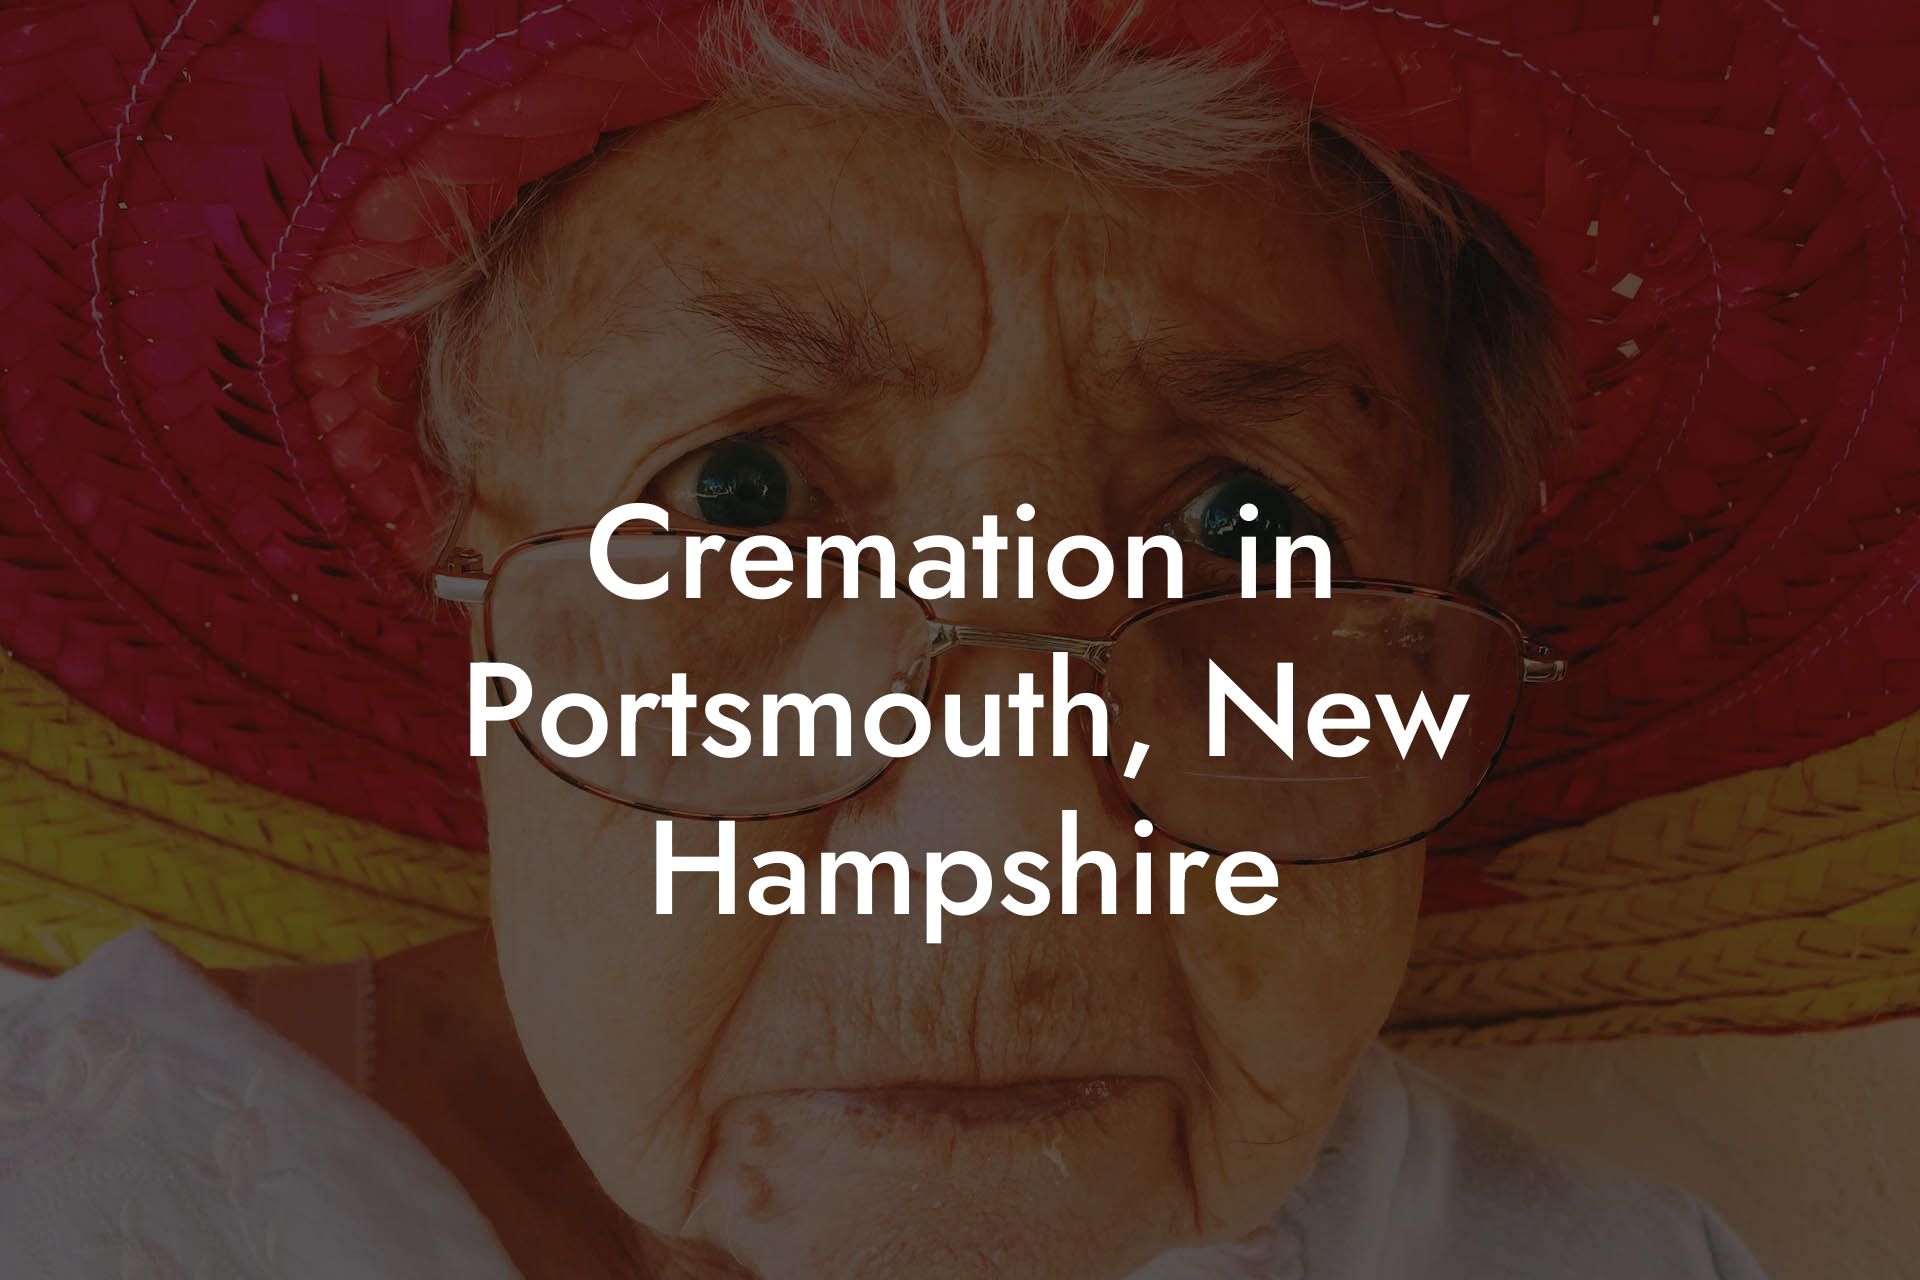 Cremation in Portsmouth, New Hampshire